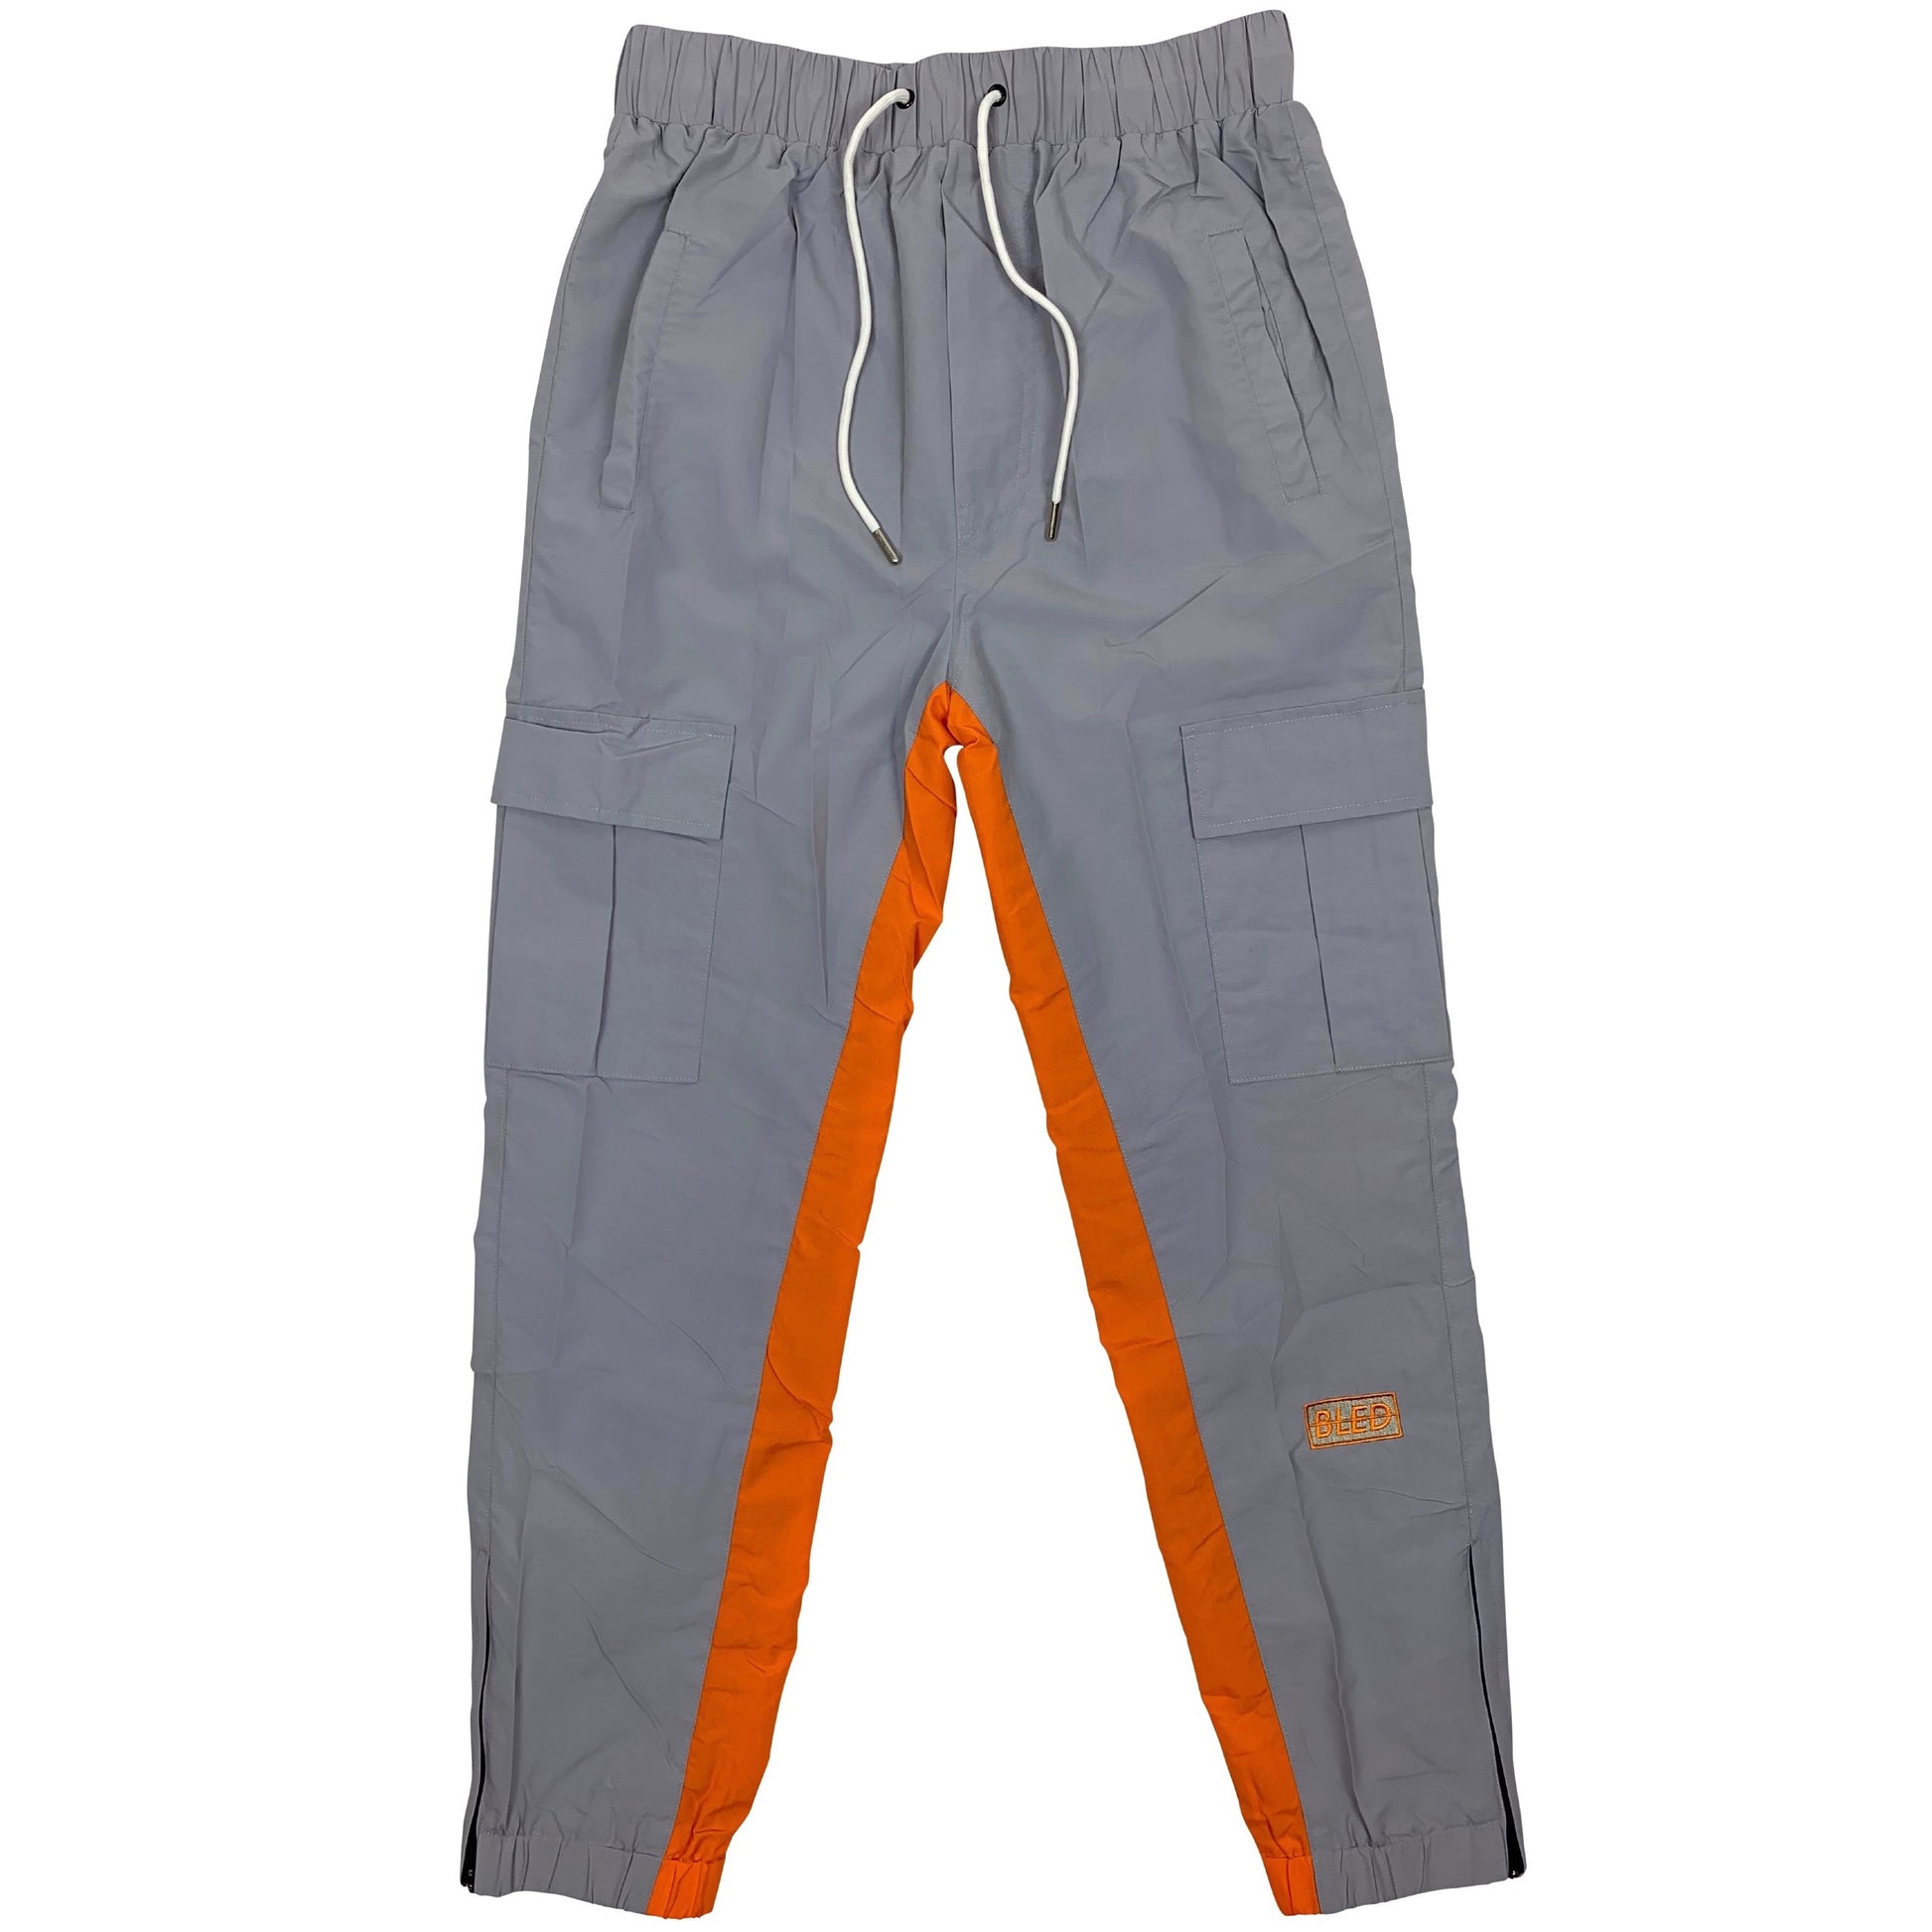 bled gray orange track pant streetwear jogger hype clothing bledwear fashion grailed hypebeast